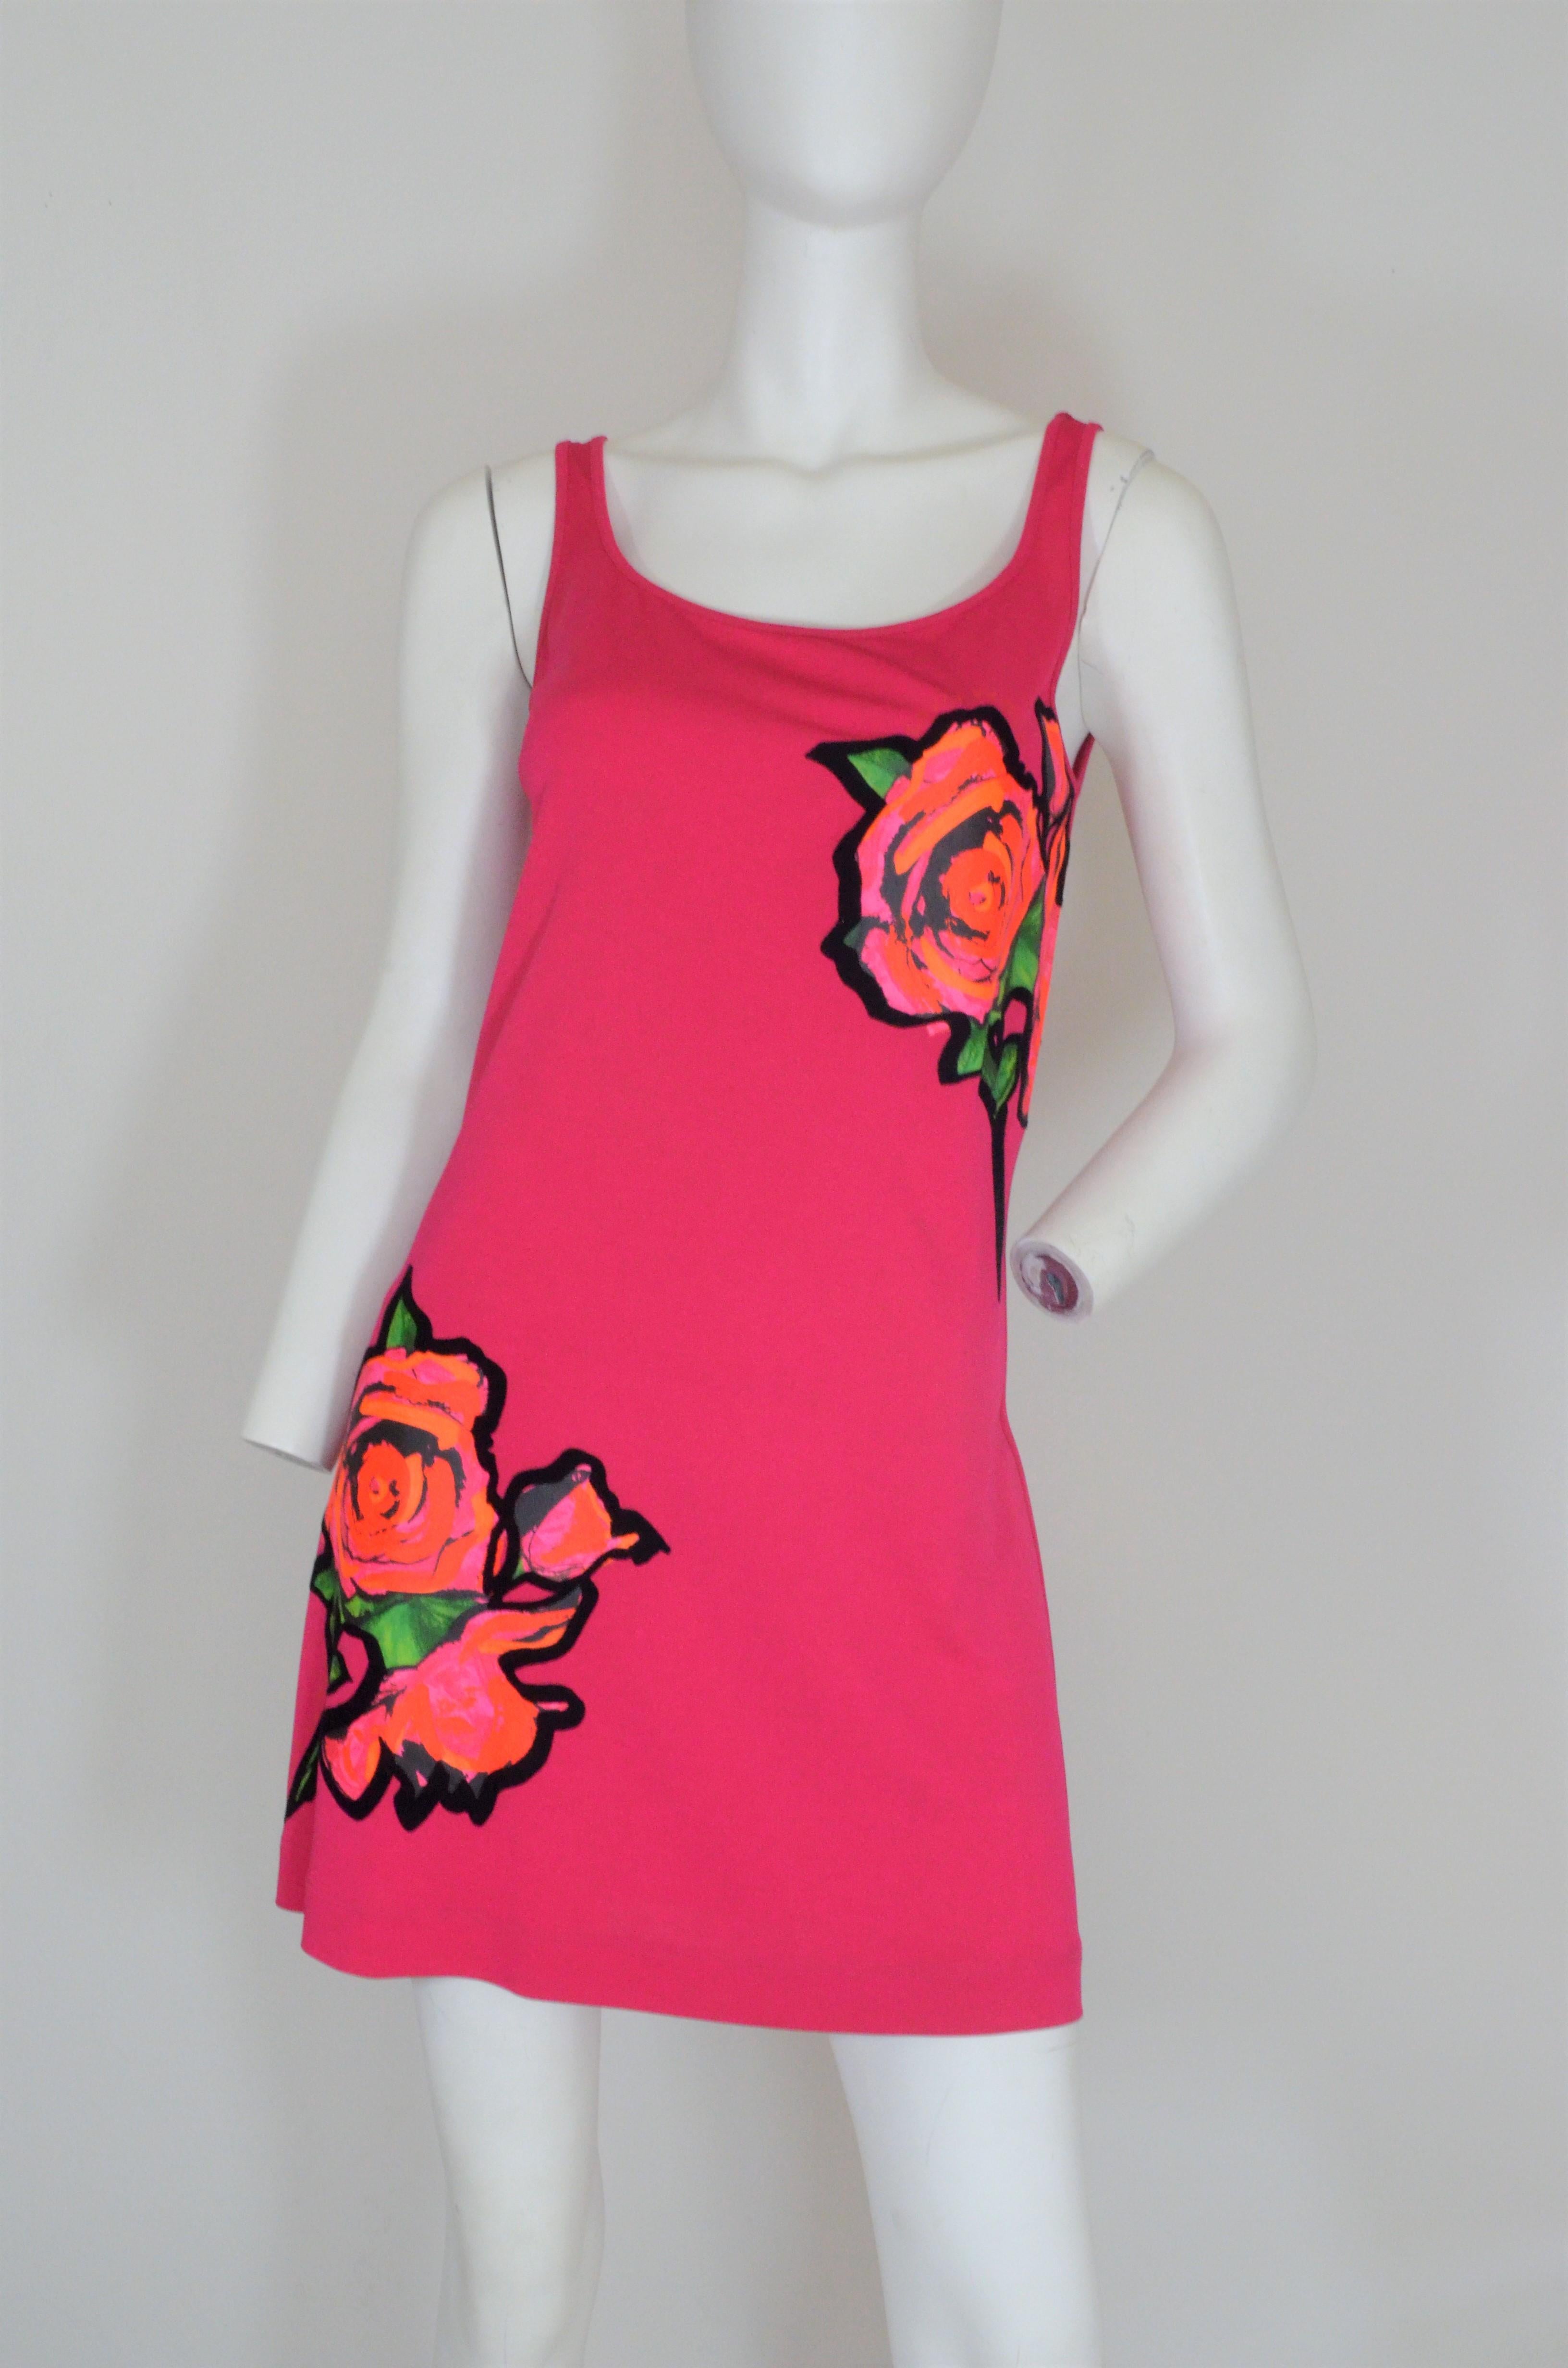 Louis Vuitton x Stephen Sprouse Jersey Dress with Flower Motif -- Dress is featured in a bright pink color with a black velvet outlining on the floral painted design. Dress is a size 38. 100% viscose, Made in Italy.

Measurements:
bust 34'', waist